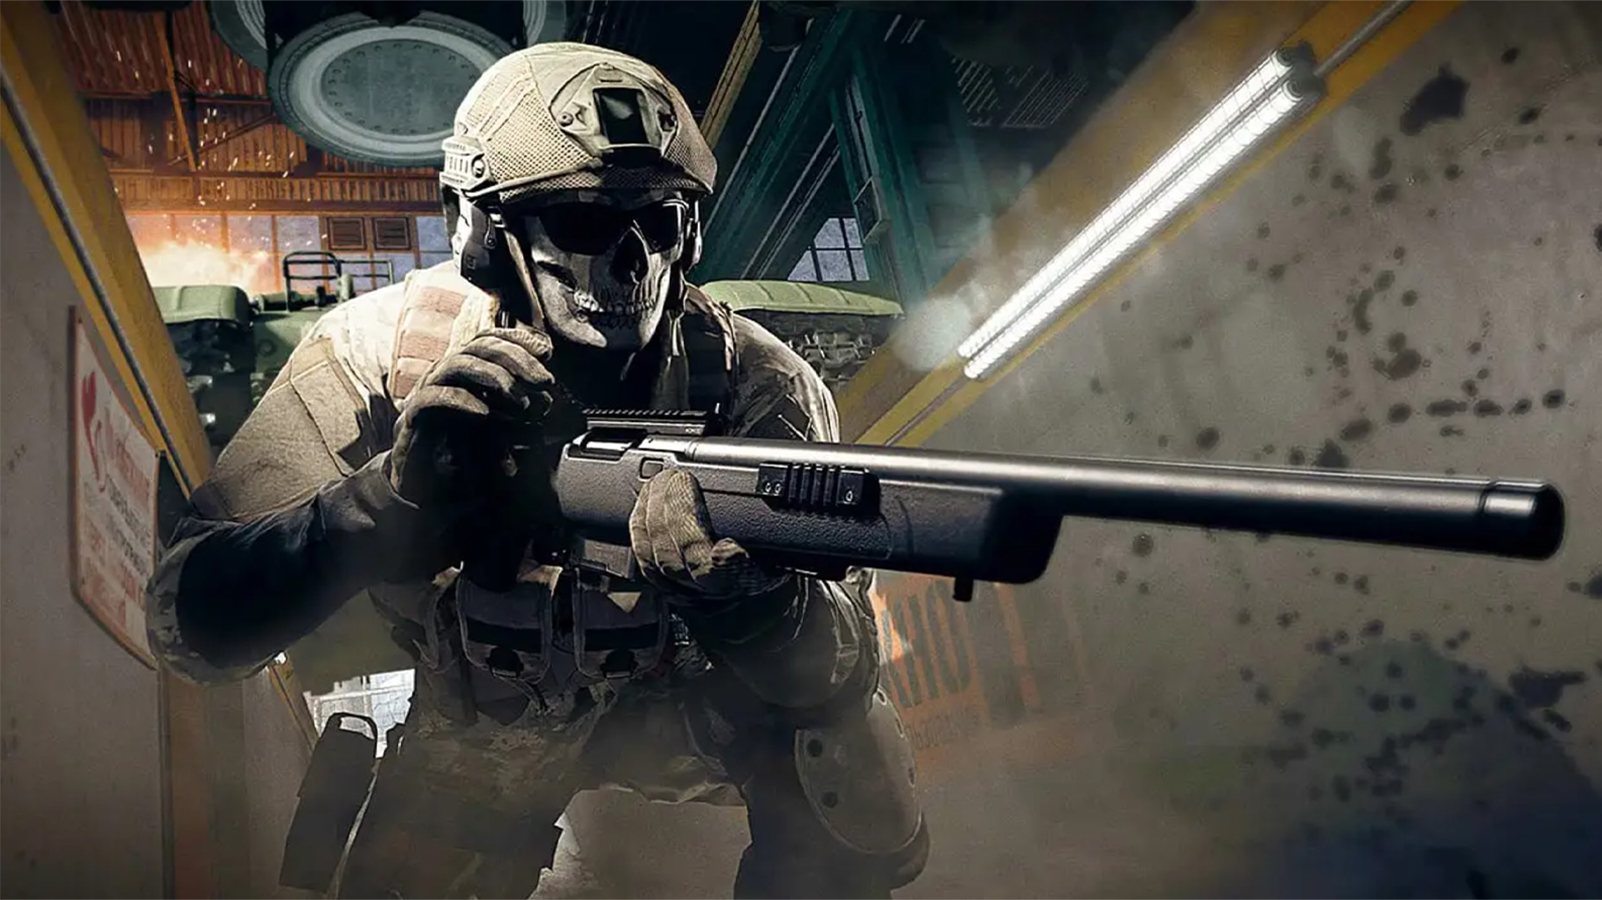 MW3 players fed up with being penalized for “piss poor” server